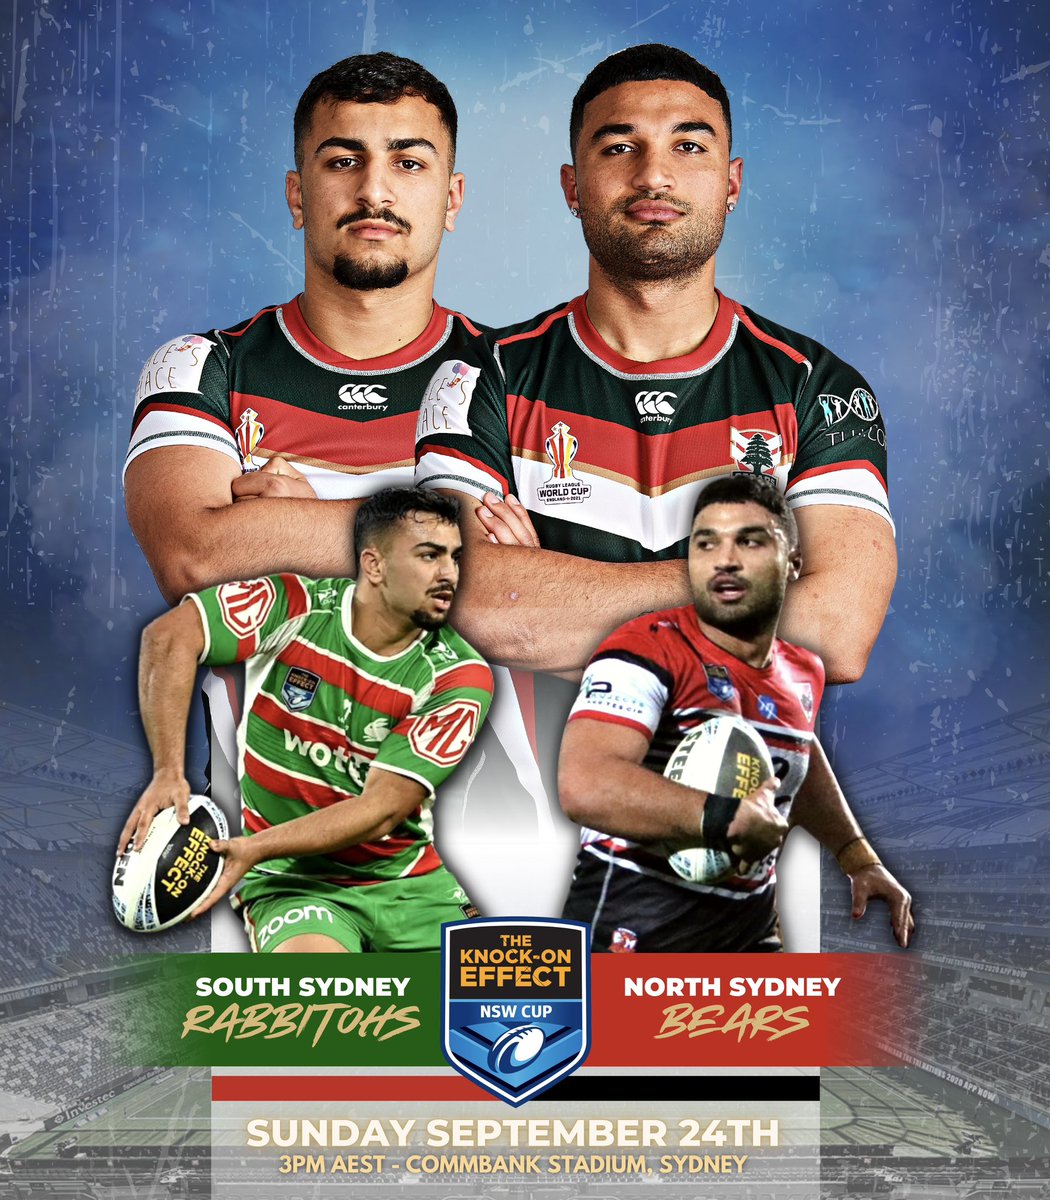 Enemies Today, Cedars Forever. 🇱🇧🤝 Good Luck to both Elie El Zakhem & Jaxson Rahme as they face off in the @NSWCup Grand Final today at 3pm AEST at Commbank Stadium, Sydney! The Game will be streamed on Channel 9 aswell as the NSWRL website for international viewers 🙌🏼